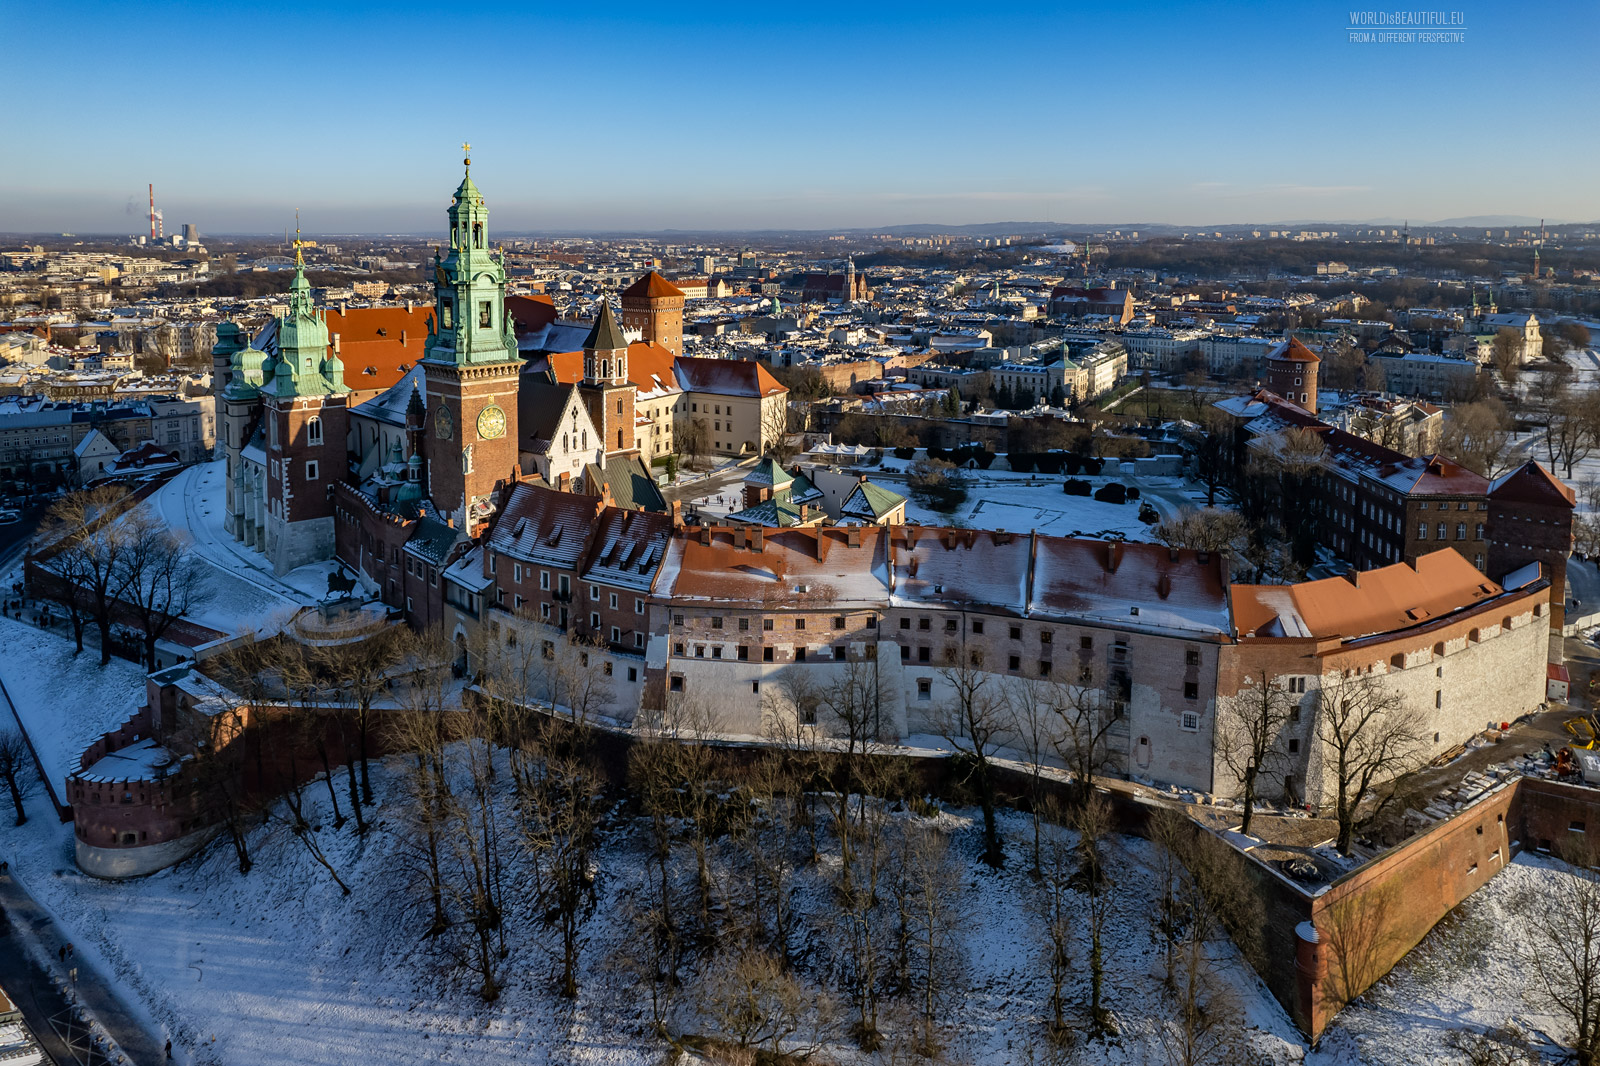 Wawel Hill from above